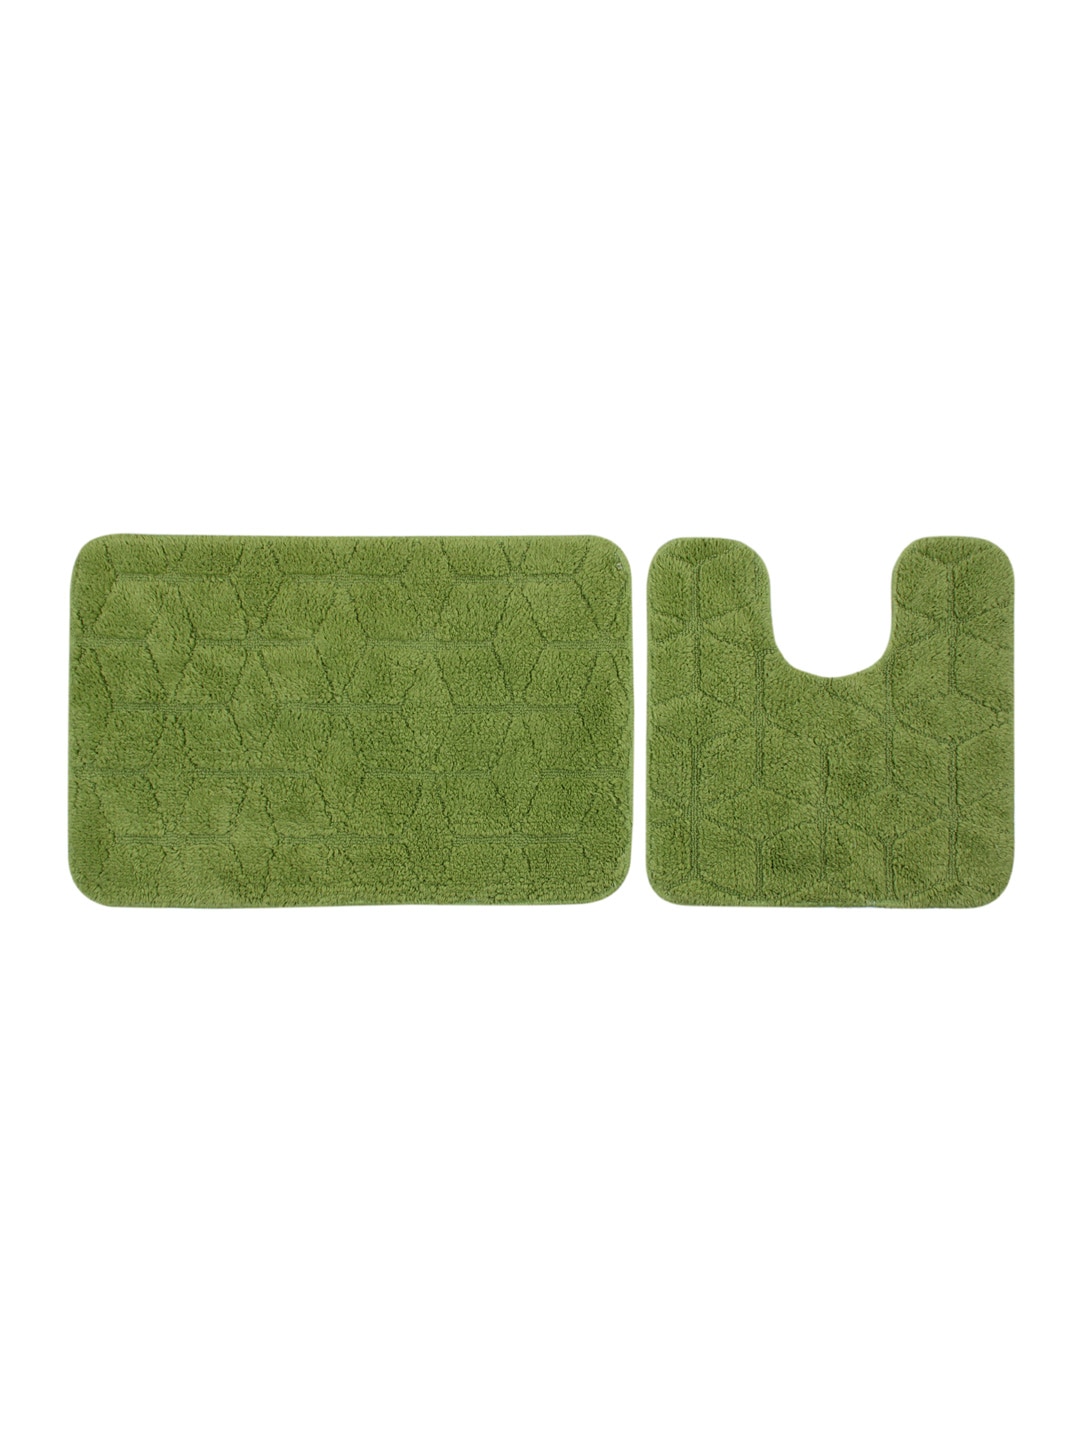 Saral Home Green Set of 2 Rectangular Bath Rugs Price in India